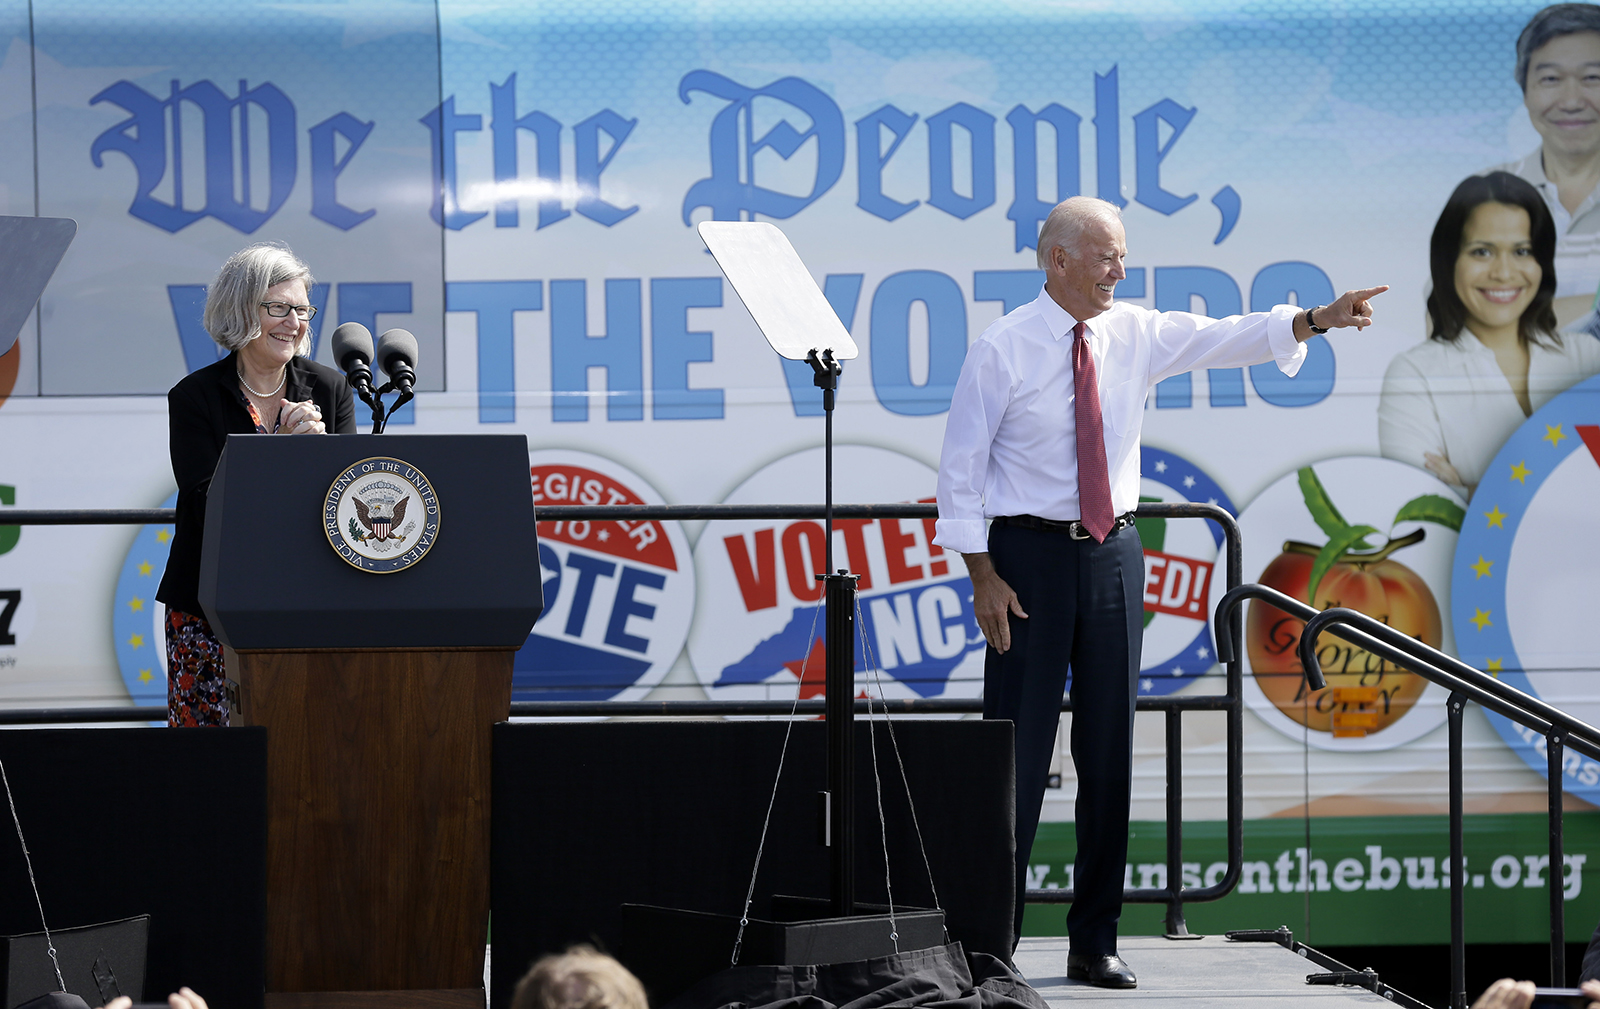 Vice President Joe Biden greets supporters with Sister Simone Campbell, left, during the kickoff of the Nuns on the Bus tour, Wednesday, Sept. 17, 2014, at the Statehouse in Des Moines, Iowa. (AP Photo/Charlie Neibergall)